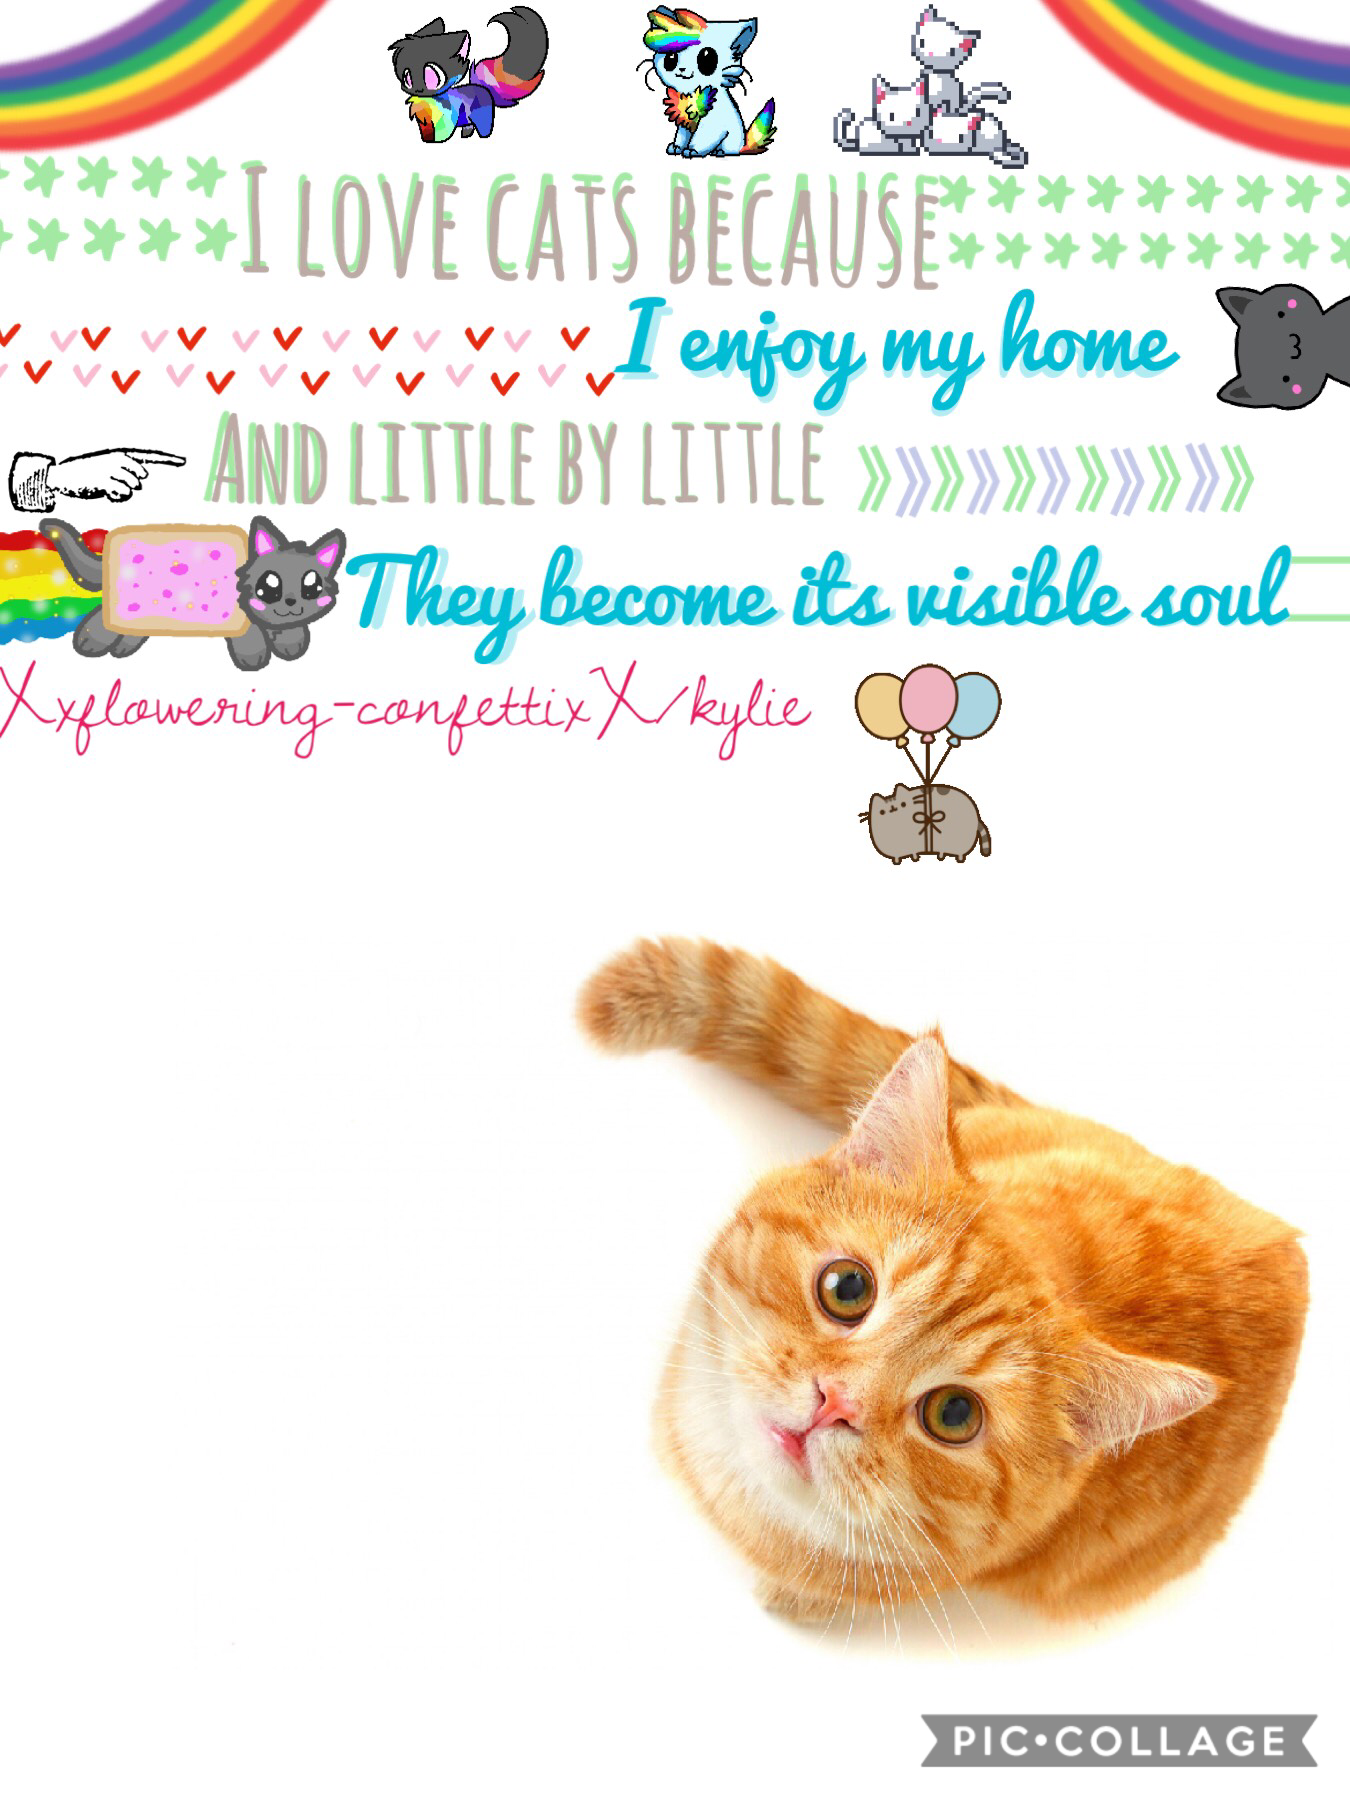 🐱Tapp!!🐱
I’m trying something different....I changed some stuff on SELFL0VE and it was for a 
Cat lover. I wanted to post this because it is something to keep me going! My goal is to have at least 1 JUST 1 feature! Help me reach my goal! Please?! Thanks! 